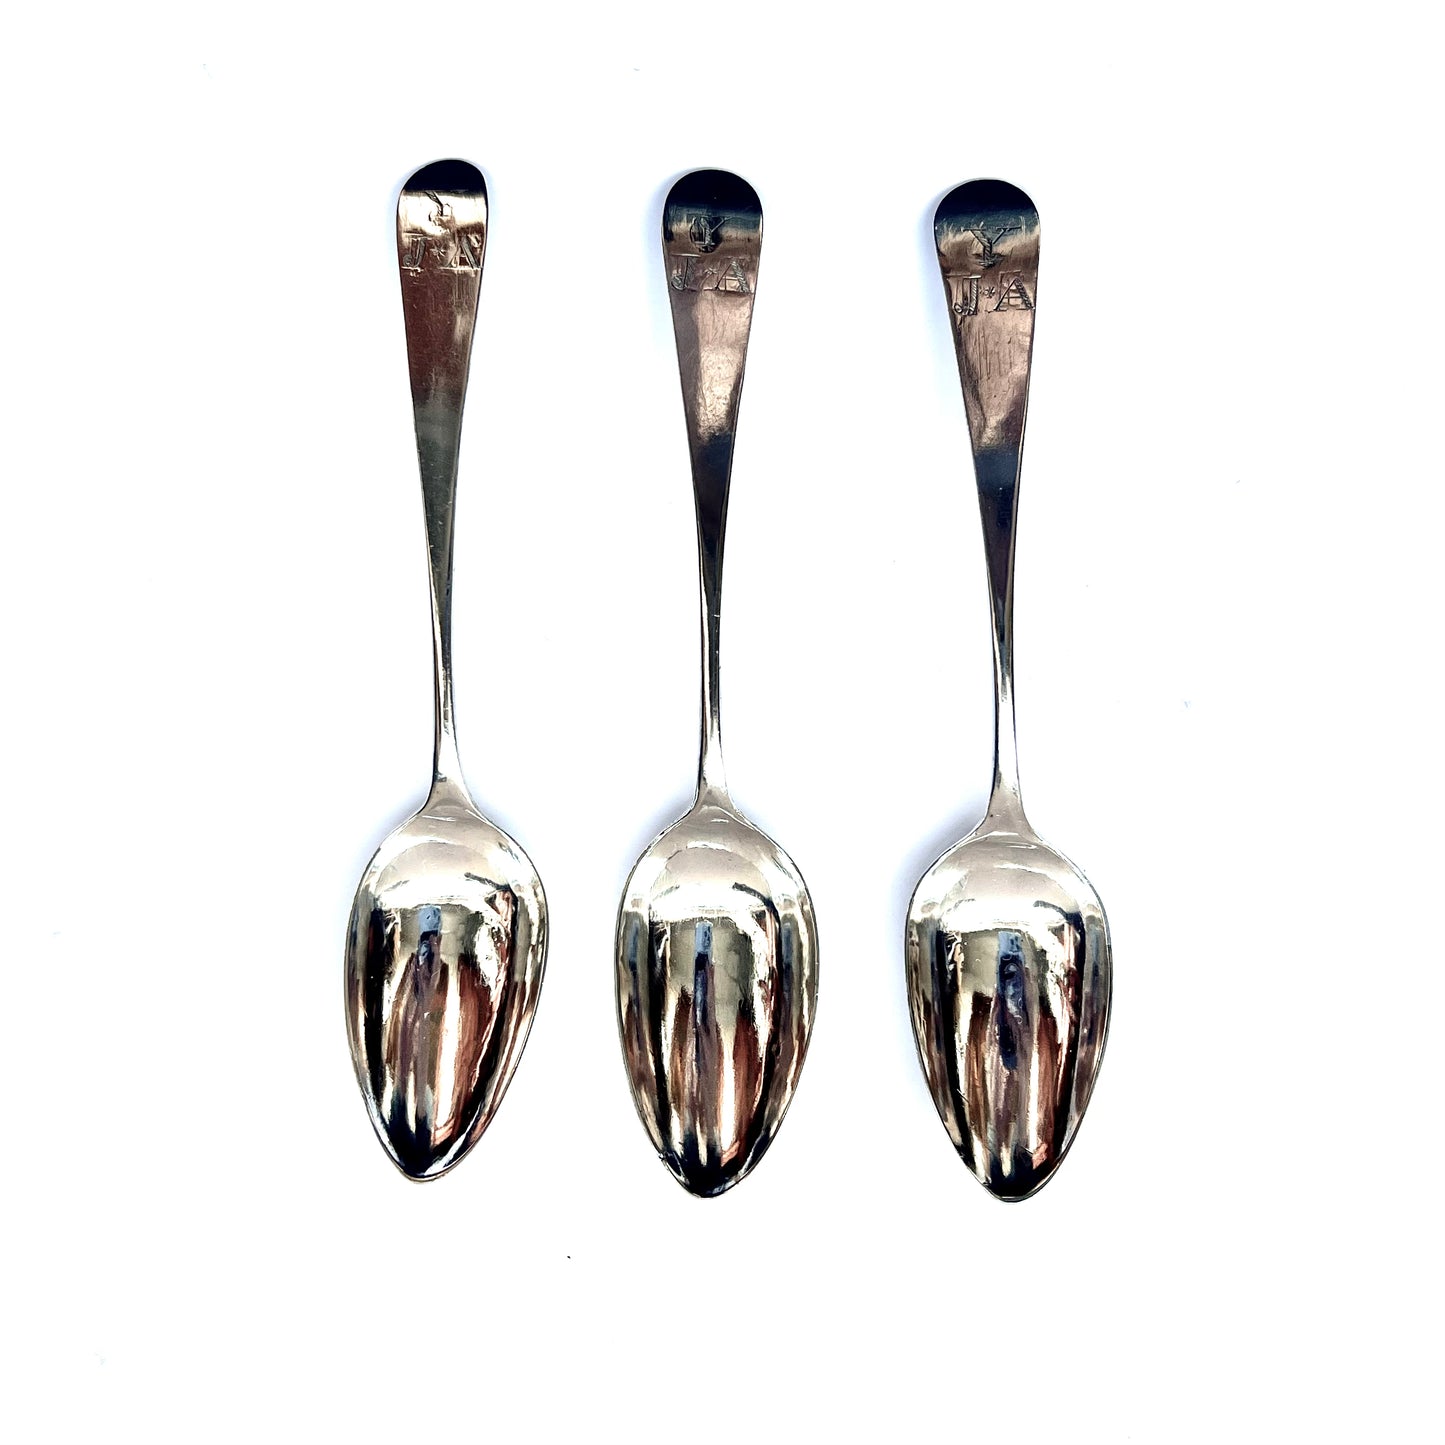 3 George III English provincial silver spoons with marks for Richard Ferris, Exeter circa 1789 to 1810